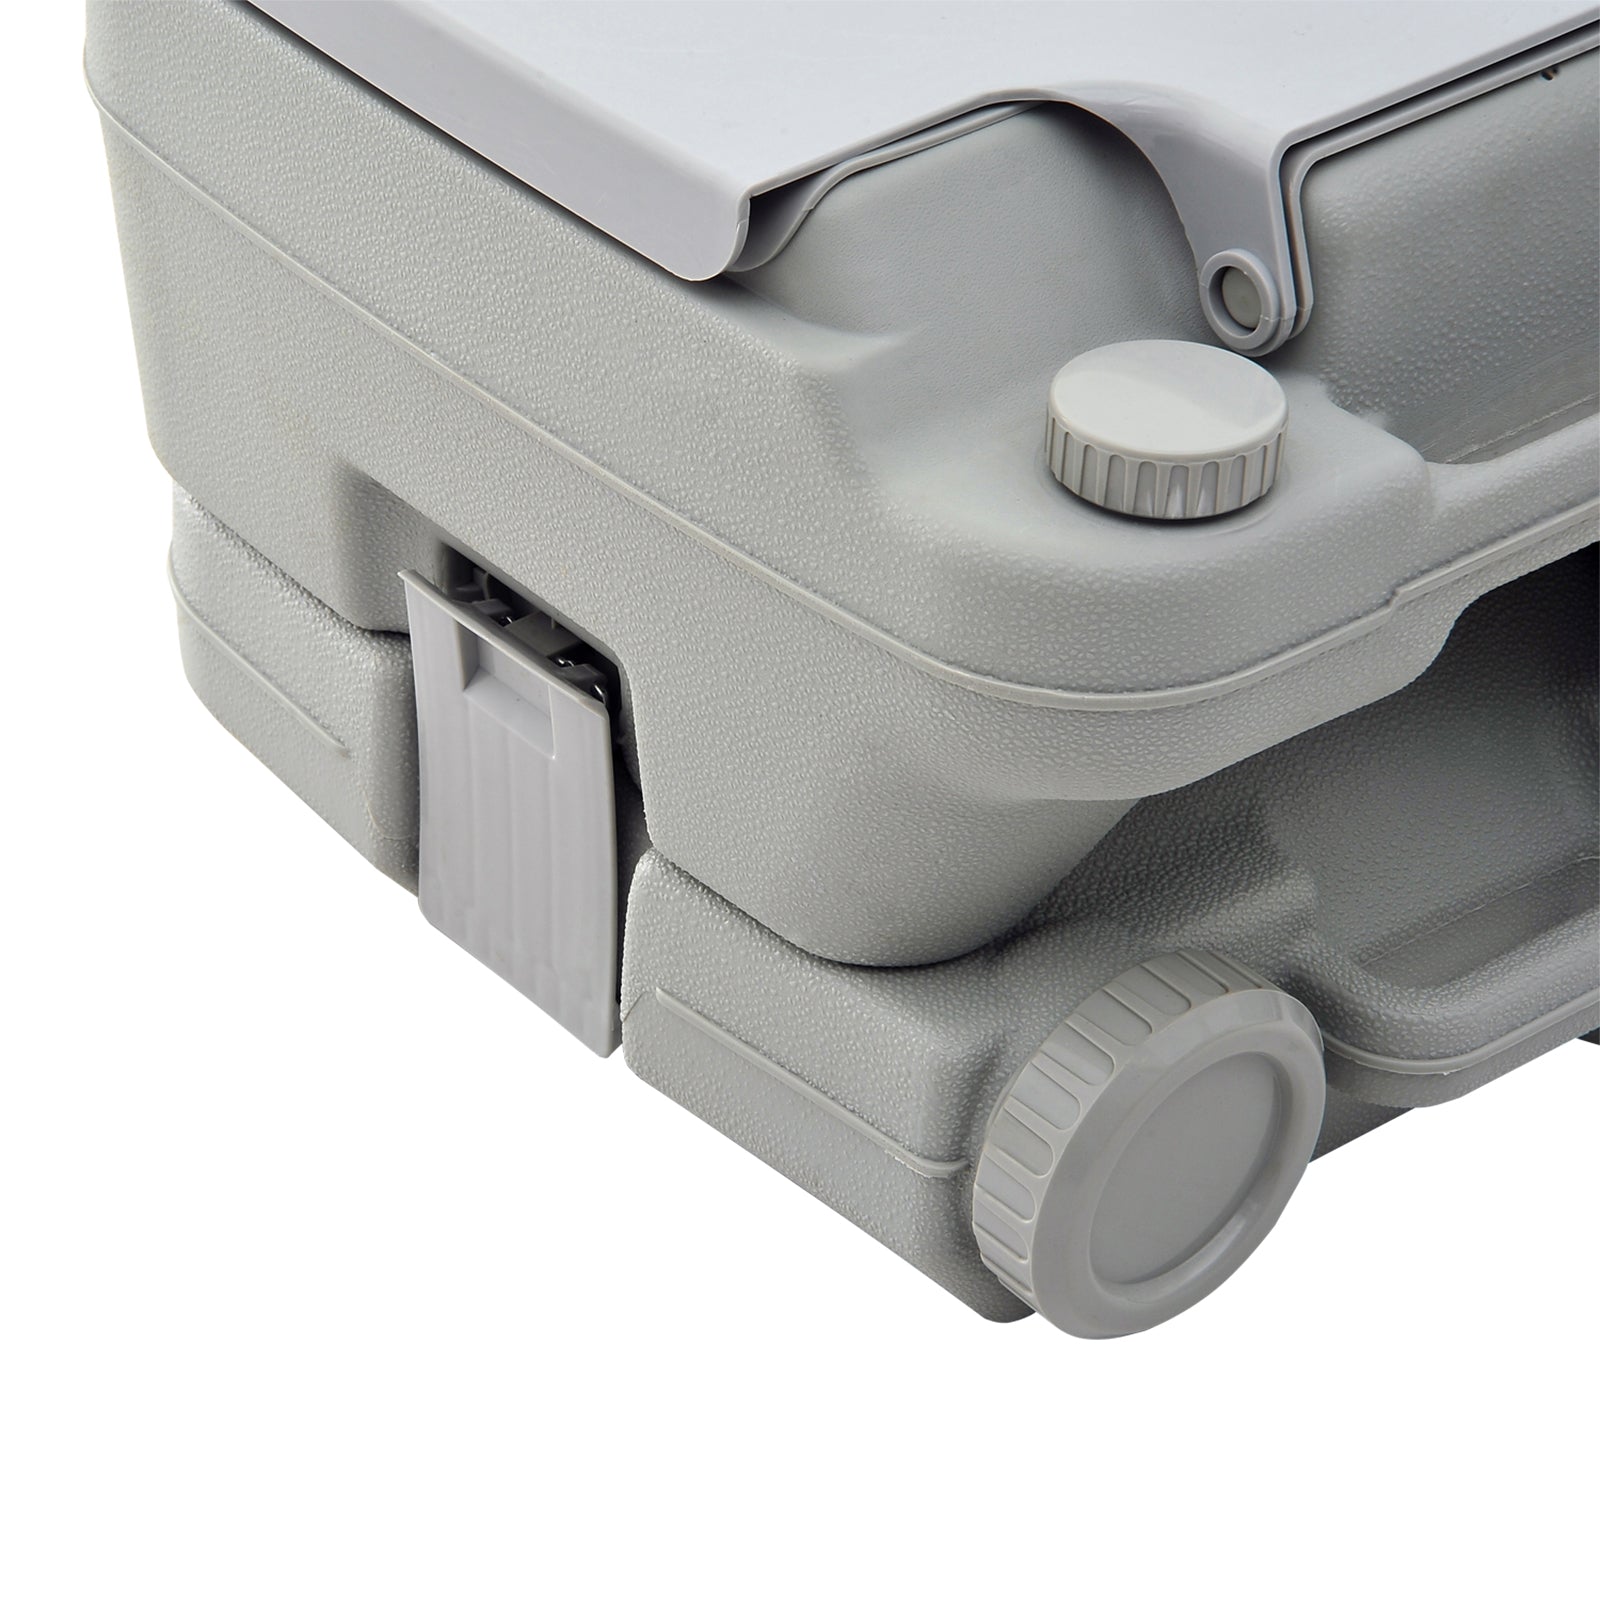 HOMCOM 10L Portable Travel Toilet Outdoor Camping Picnic with 2 Detachable Tanks & Push-button Operation, Grey - Inspirely